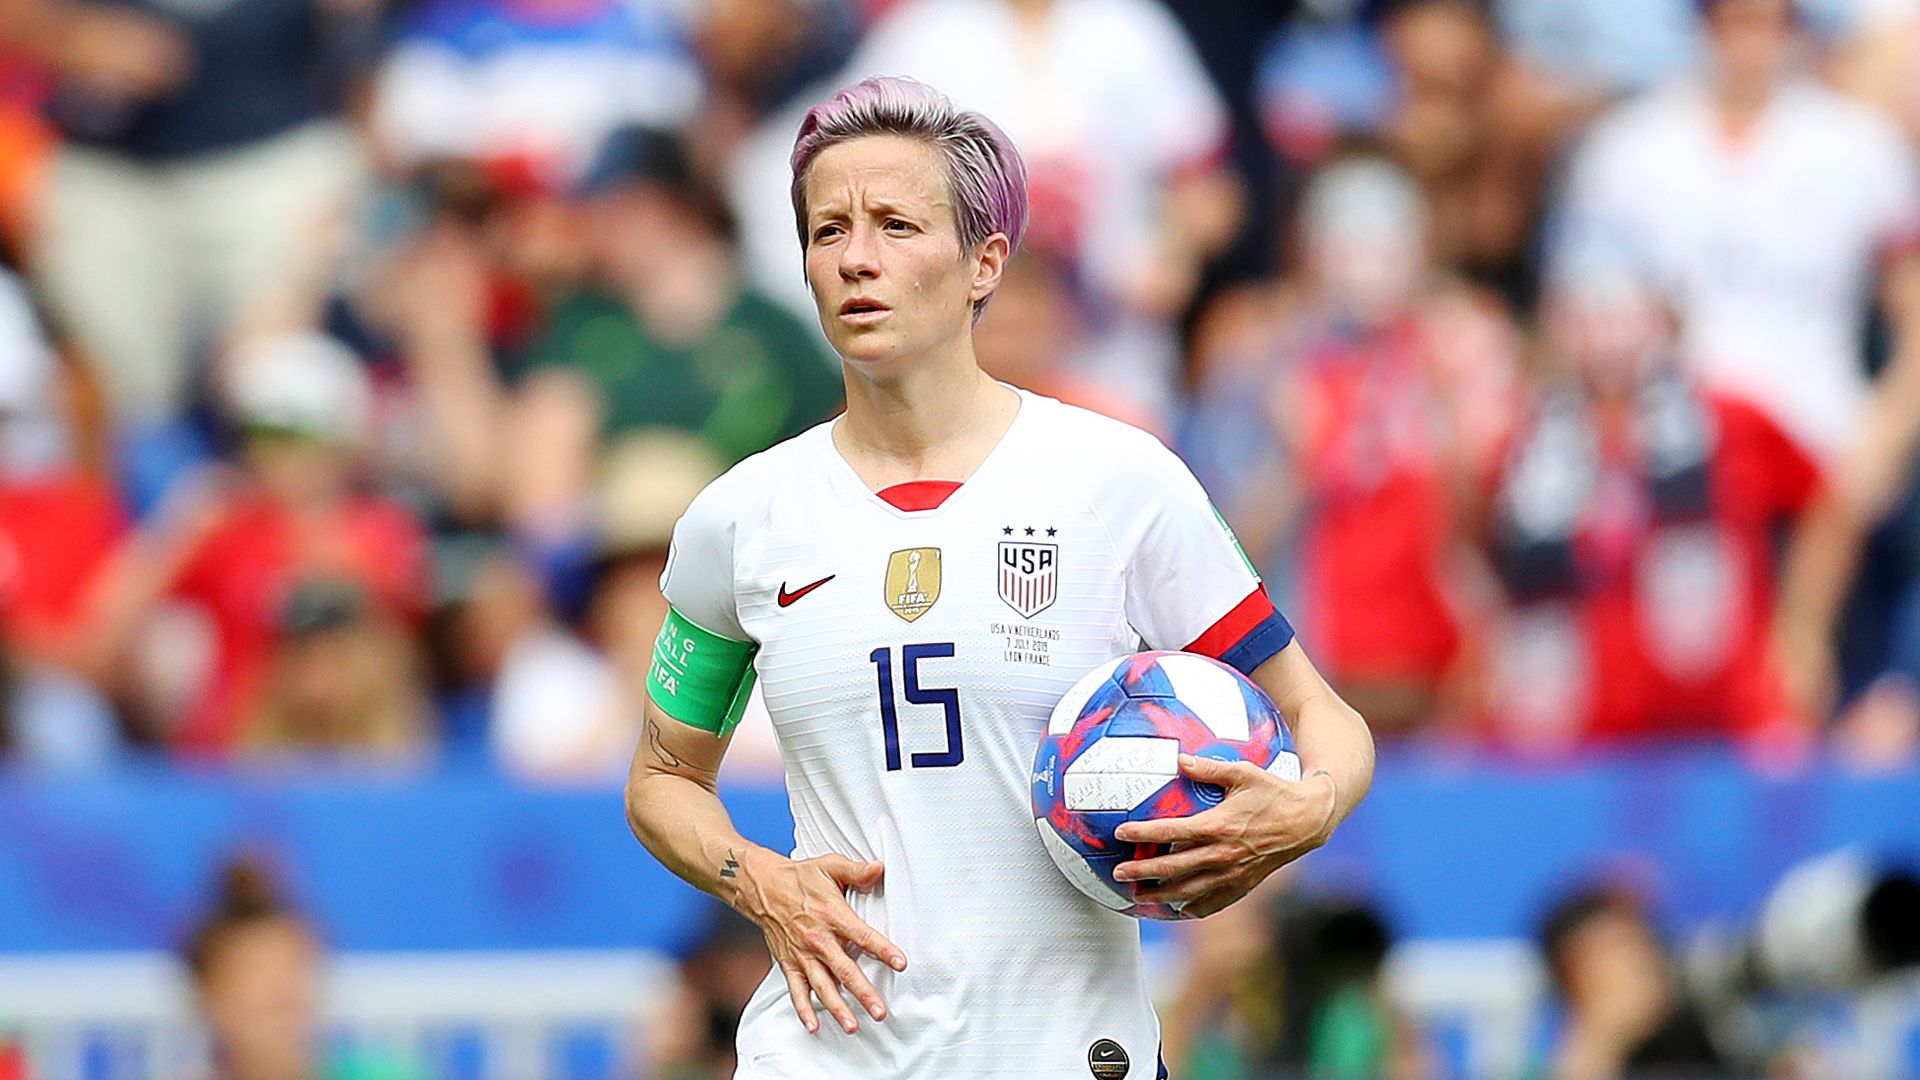 Megan Rapinoe of the USA prepares to take a penalty kick during the 2019 FIFA Women's World Cup France Final match.